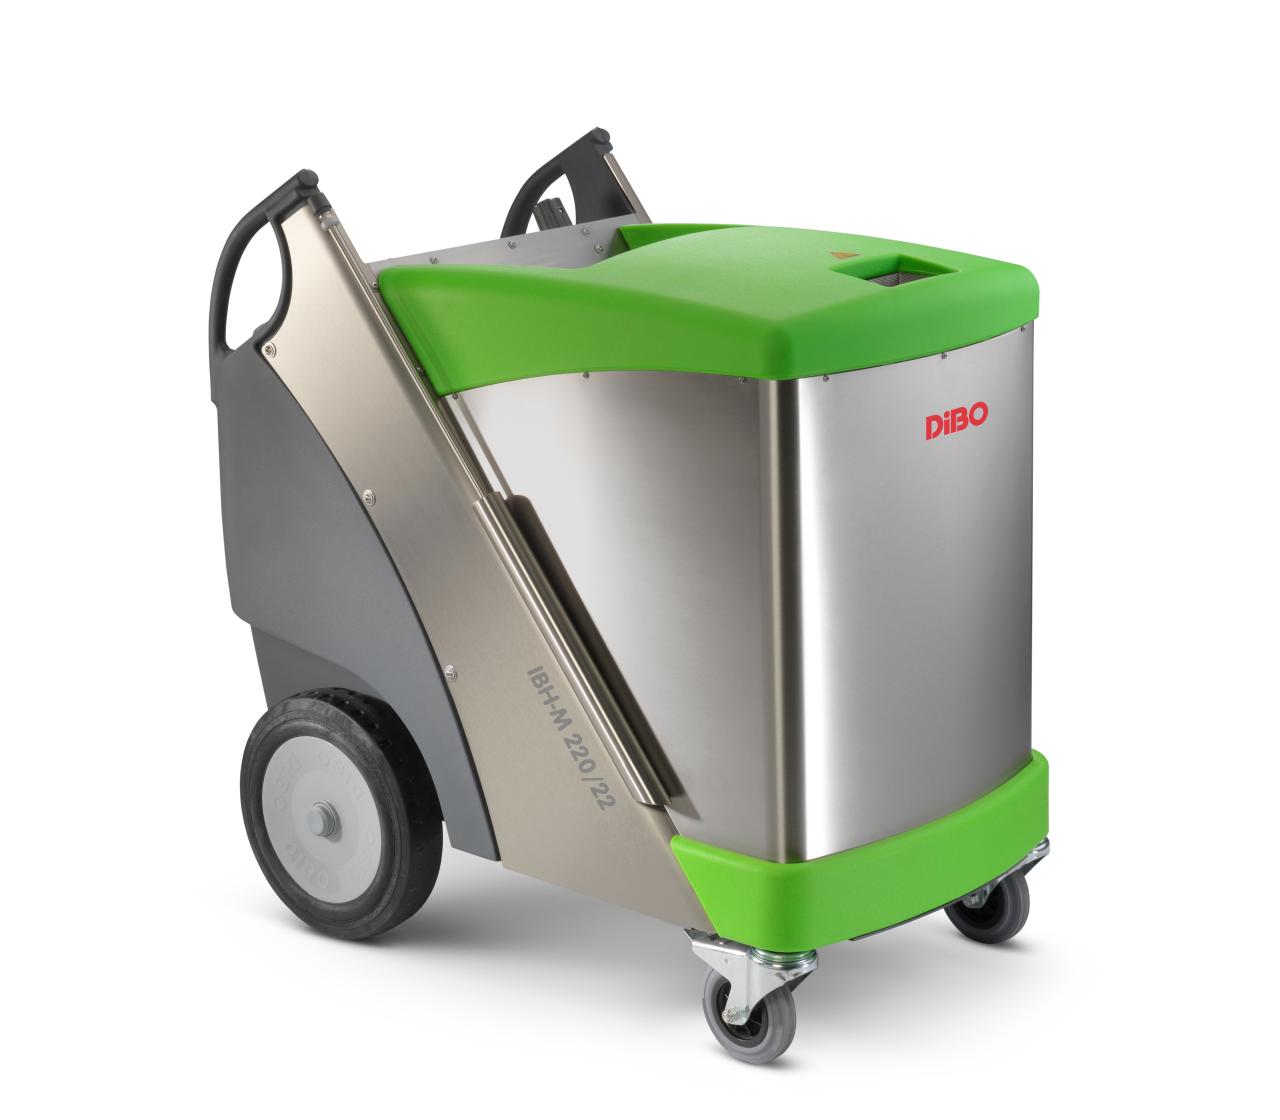 The DiBO IBH-L is an enormous powerful industrial hot water high pressure cleaner 